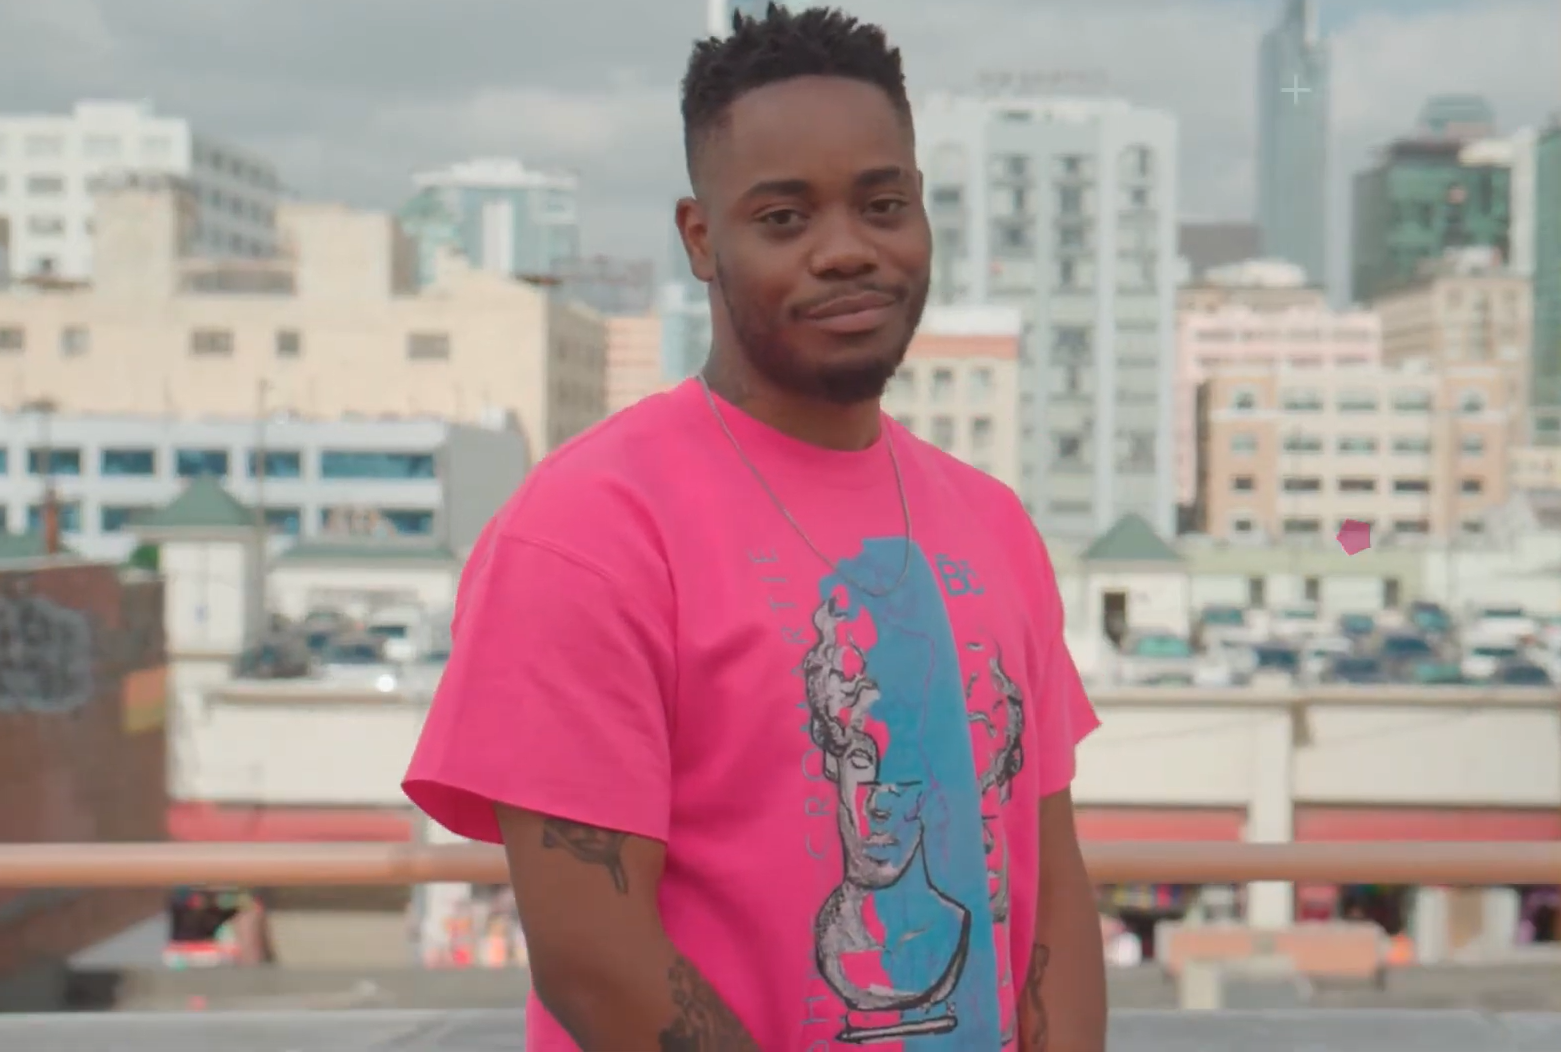 man in pink t-shirt standing among the city and smiling